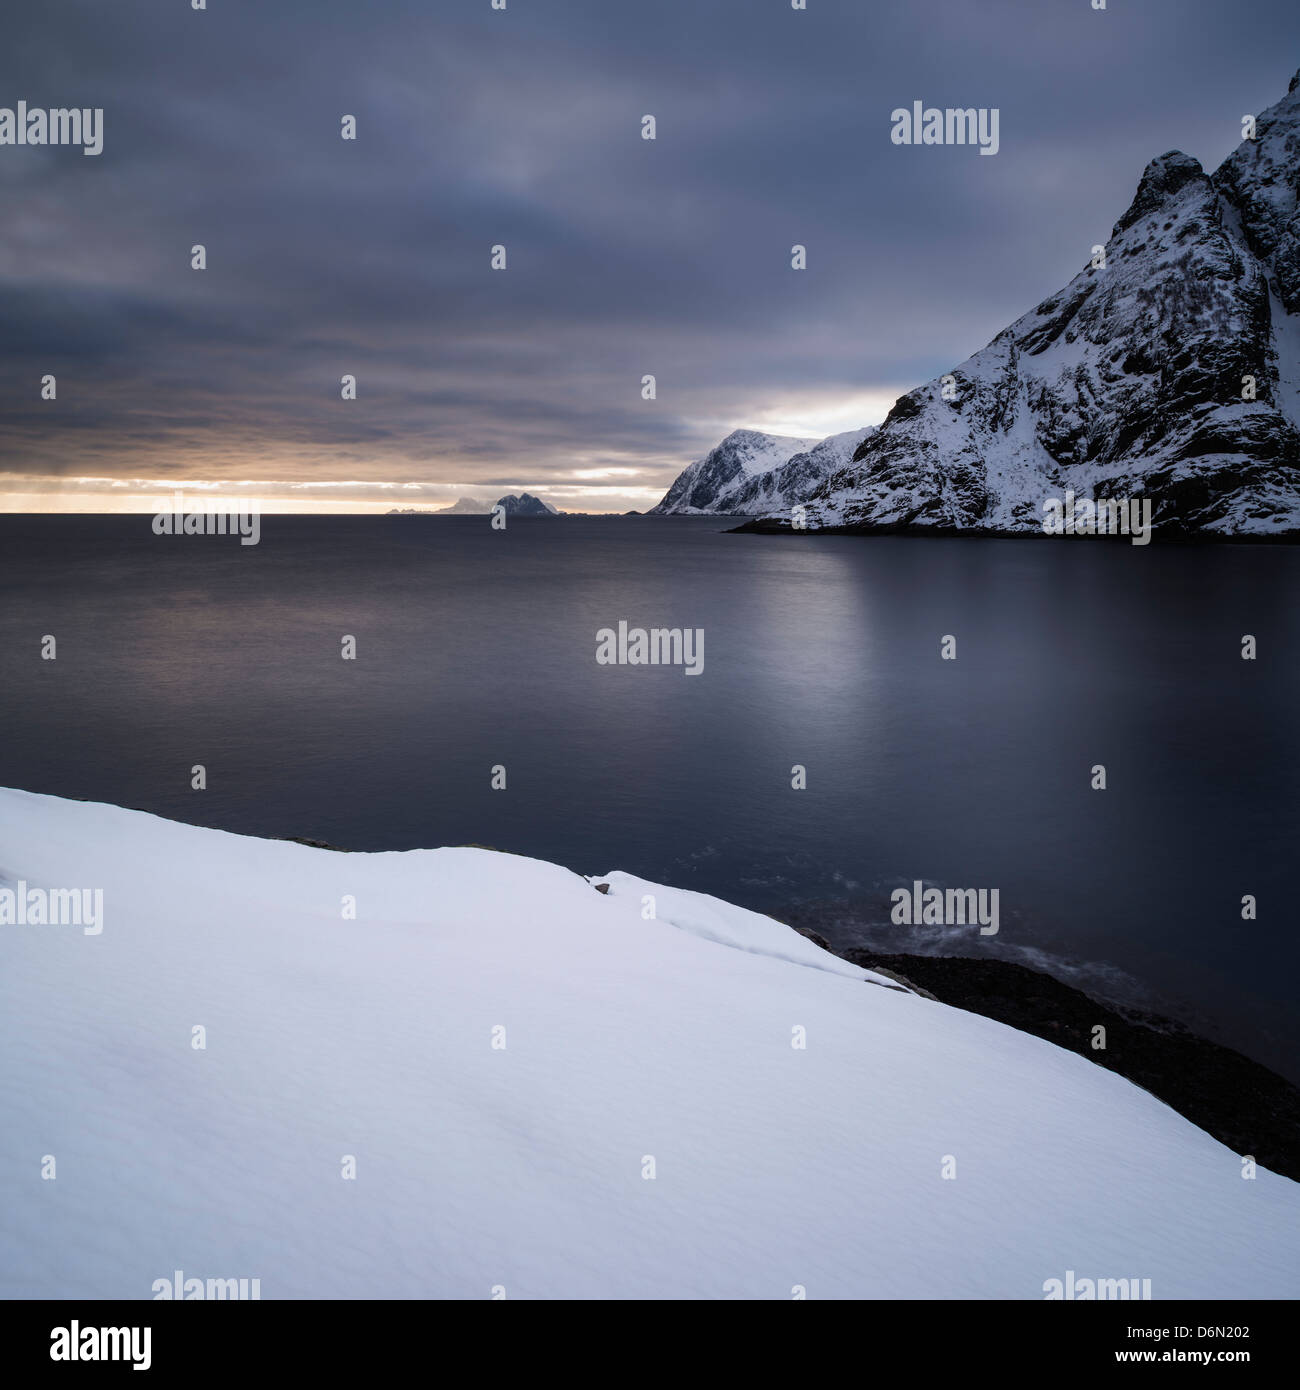 Snow covered mountains rise from sea, Å, Moskenesøy, Lofoten Islands, Norway Stock Photo